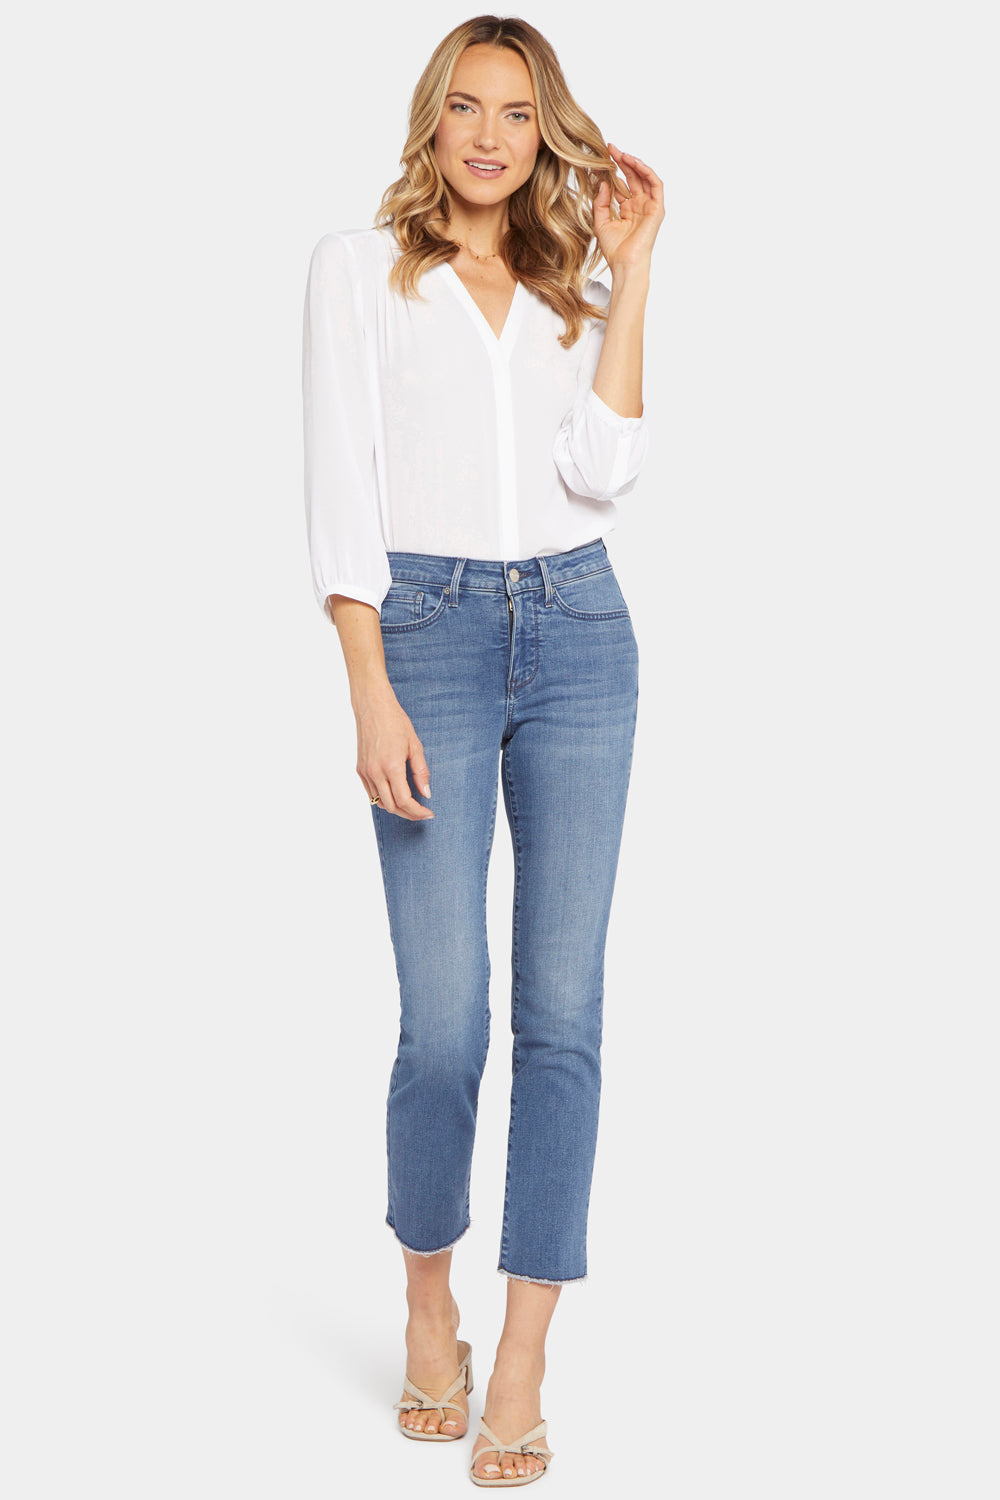 NYDJ Sheri Slim Ankle Jeans In Petite With Frayed Hems - Sweetbay